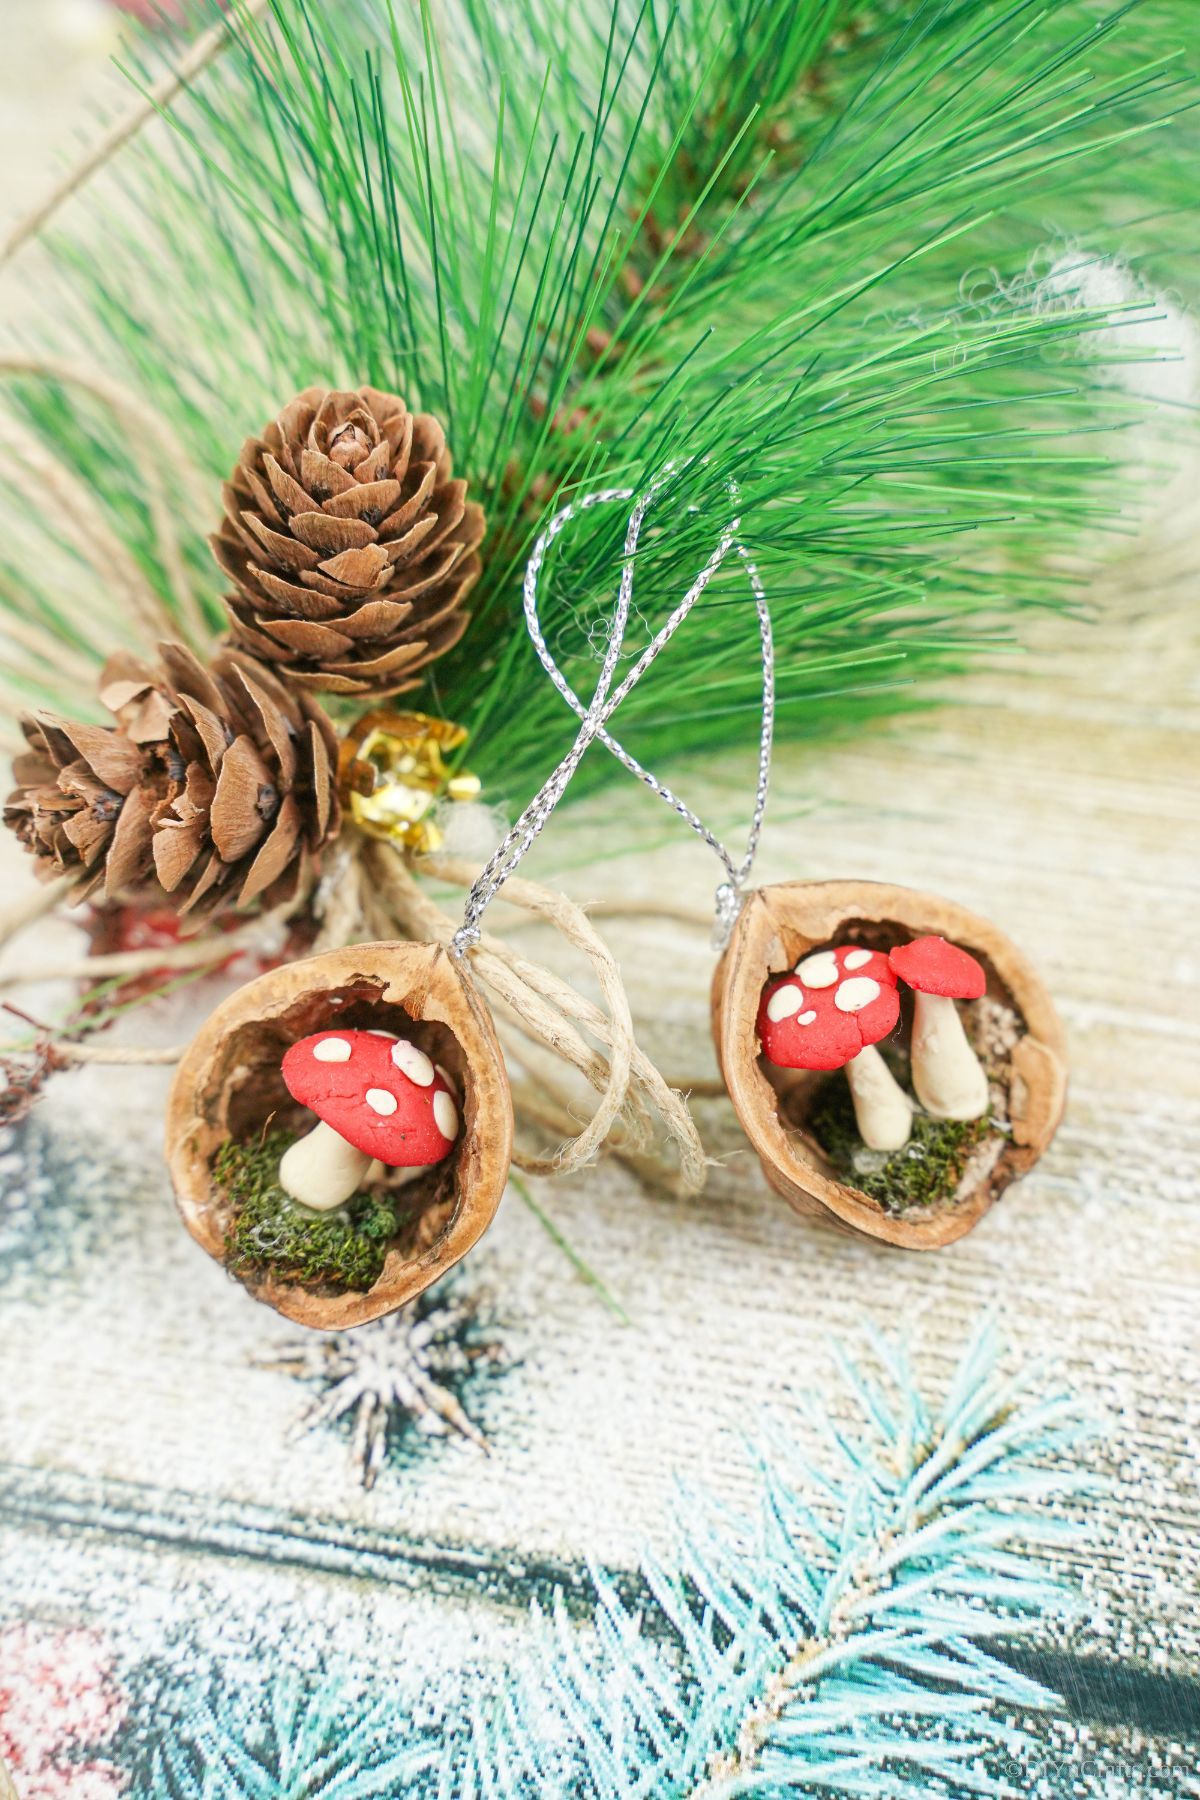 pinecones and greenery on holiday paper next to two walnut shell ornaments